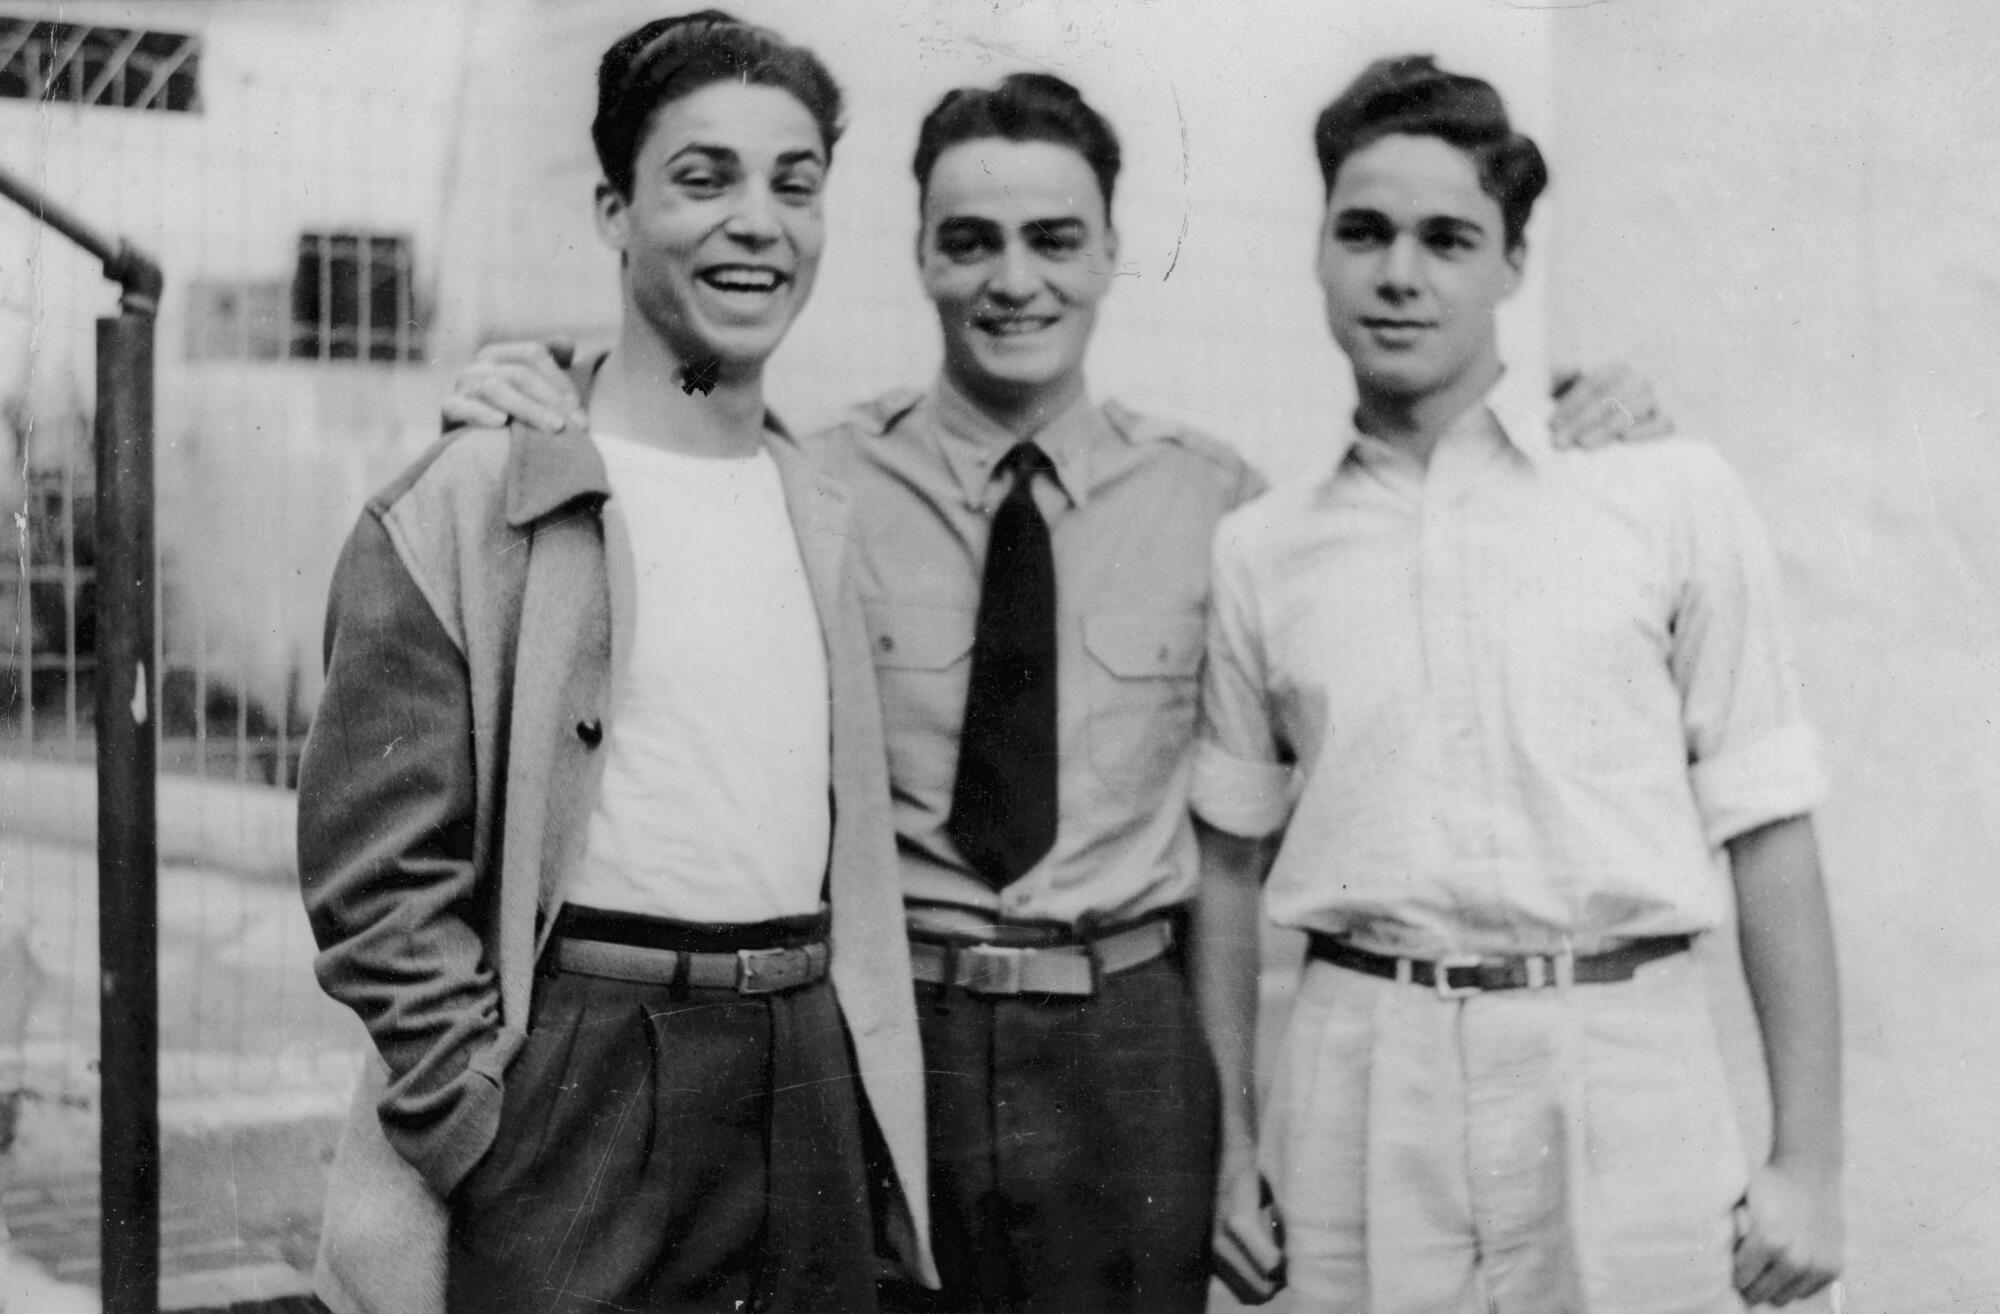 From left to right Albert, Hank and Lawrence Caruso in the early 1940s. (Photo courtesy of the Caruso family).